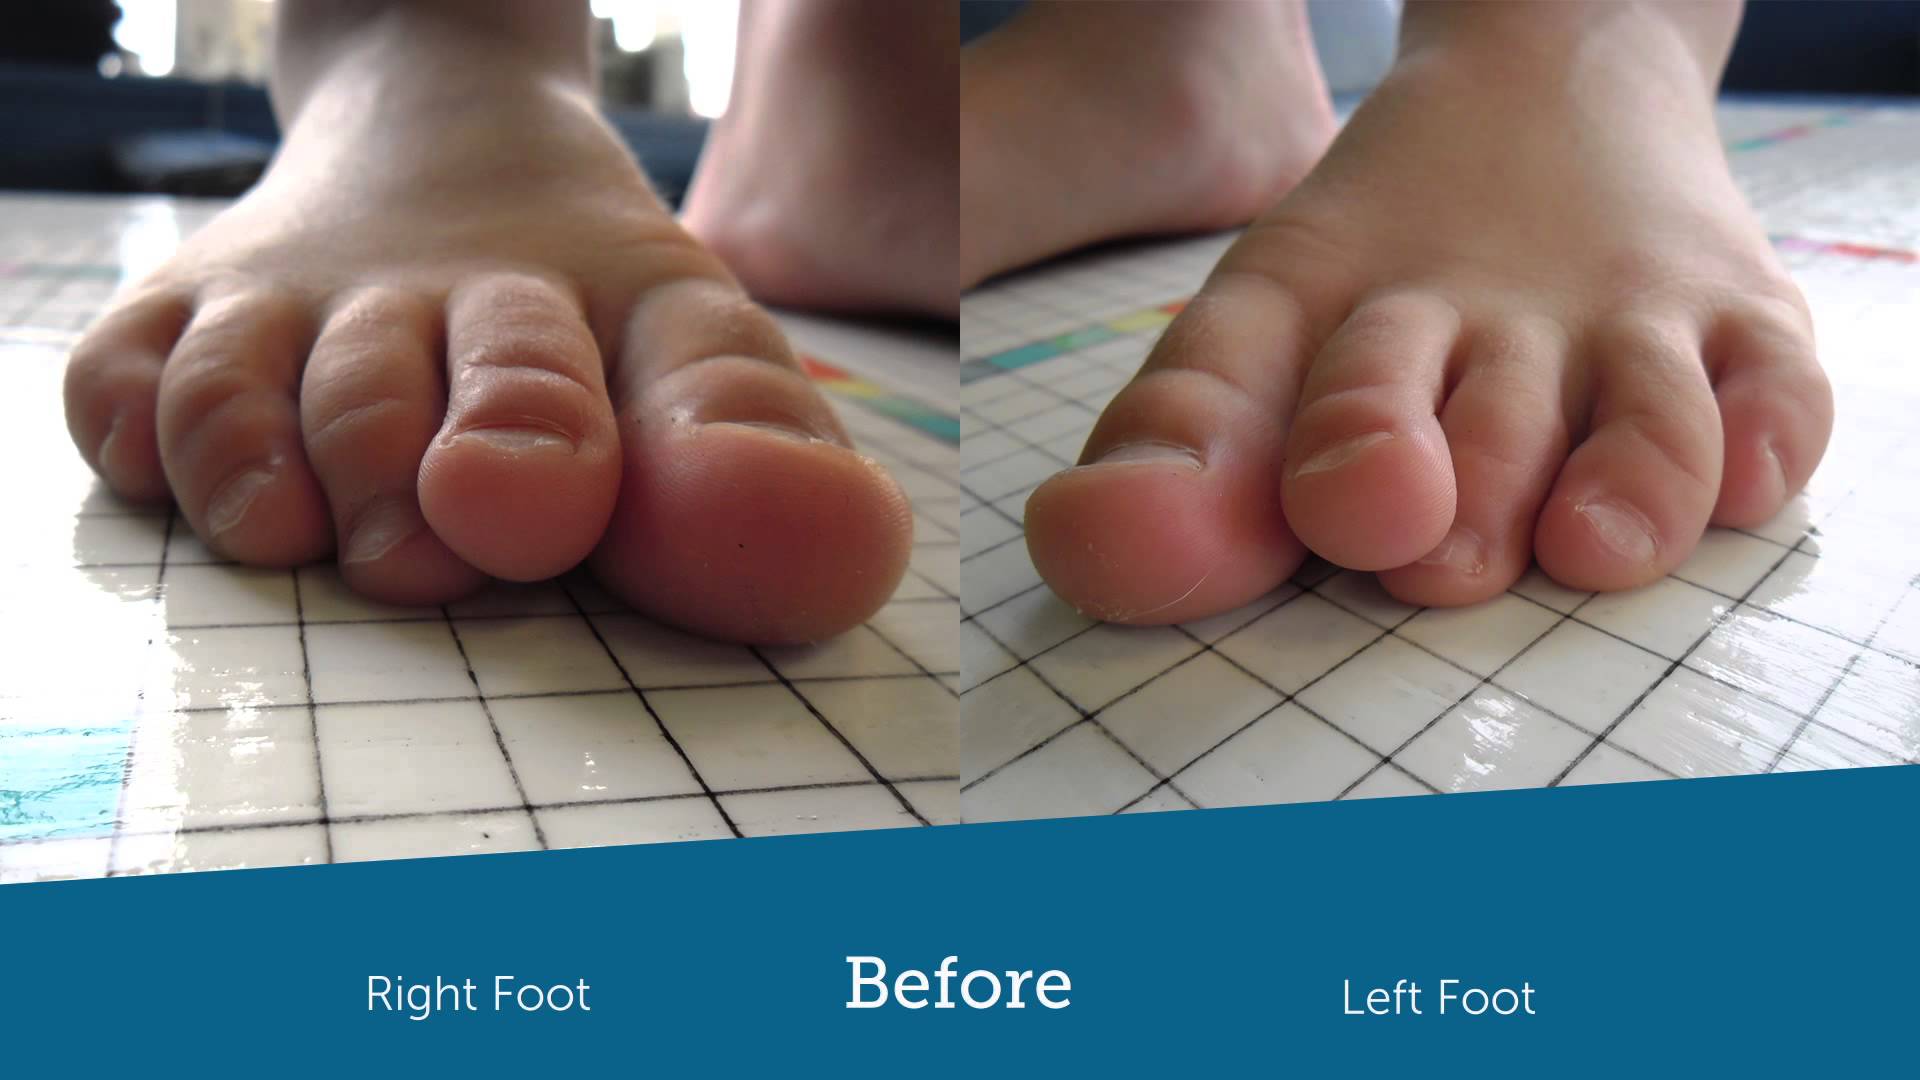 Correct Toes Helps Child with Crooked Toes - YouTube